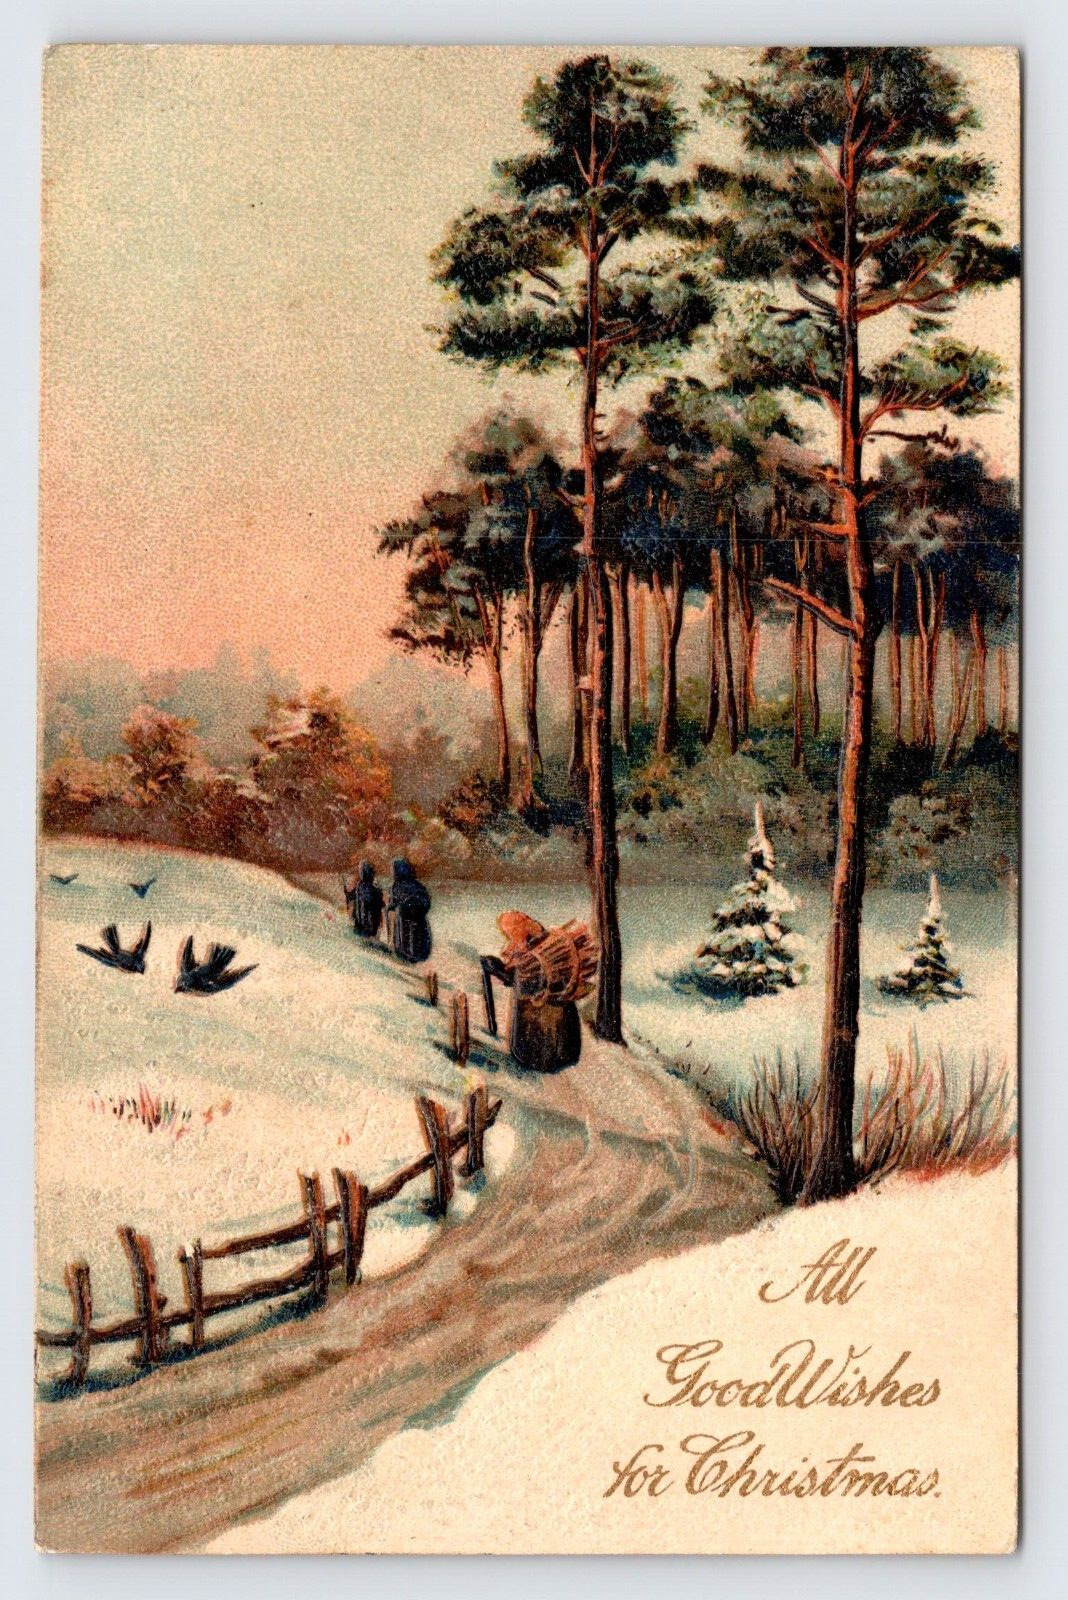 Good Wishes for Christmas, Winter Scene with Old Women Carrying Wood Postcard P3